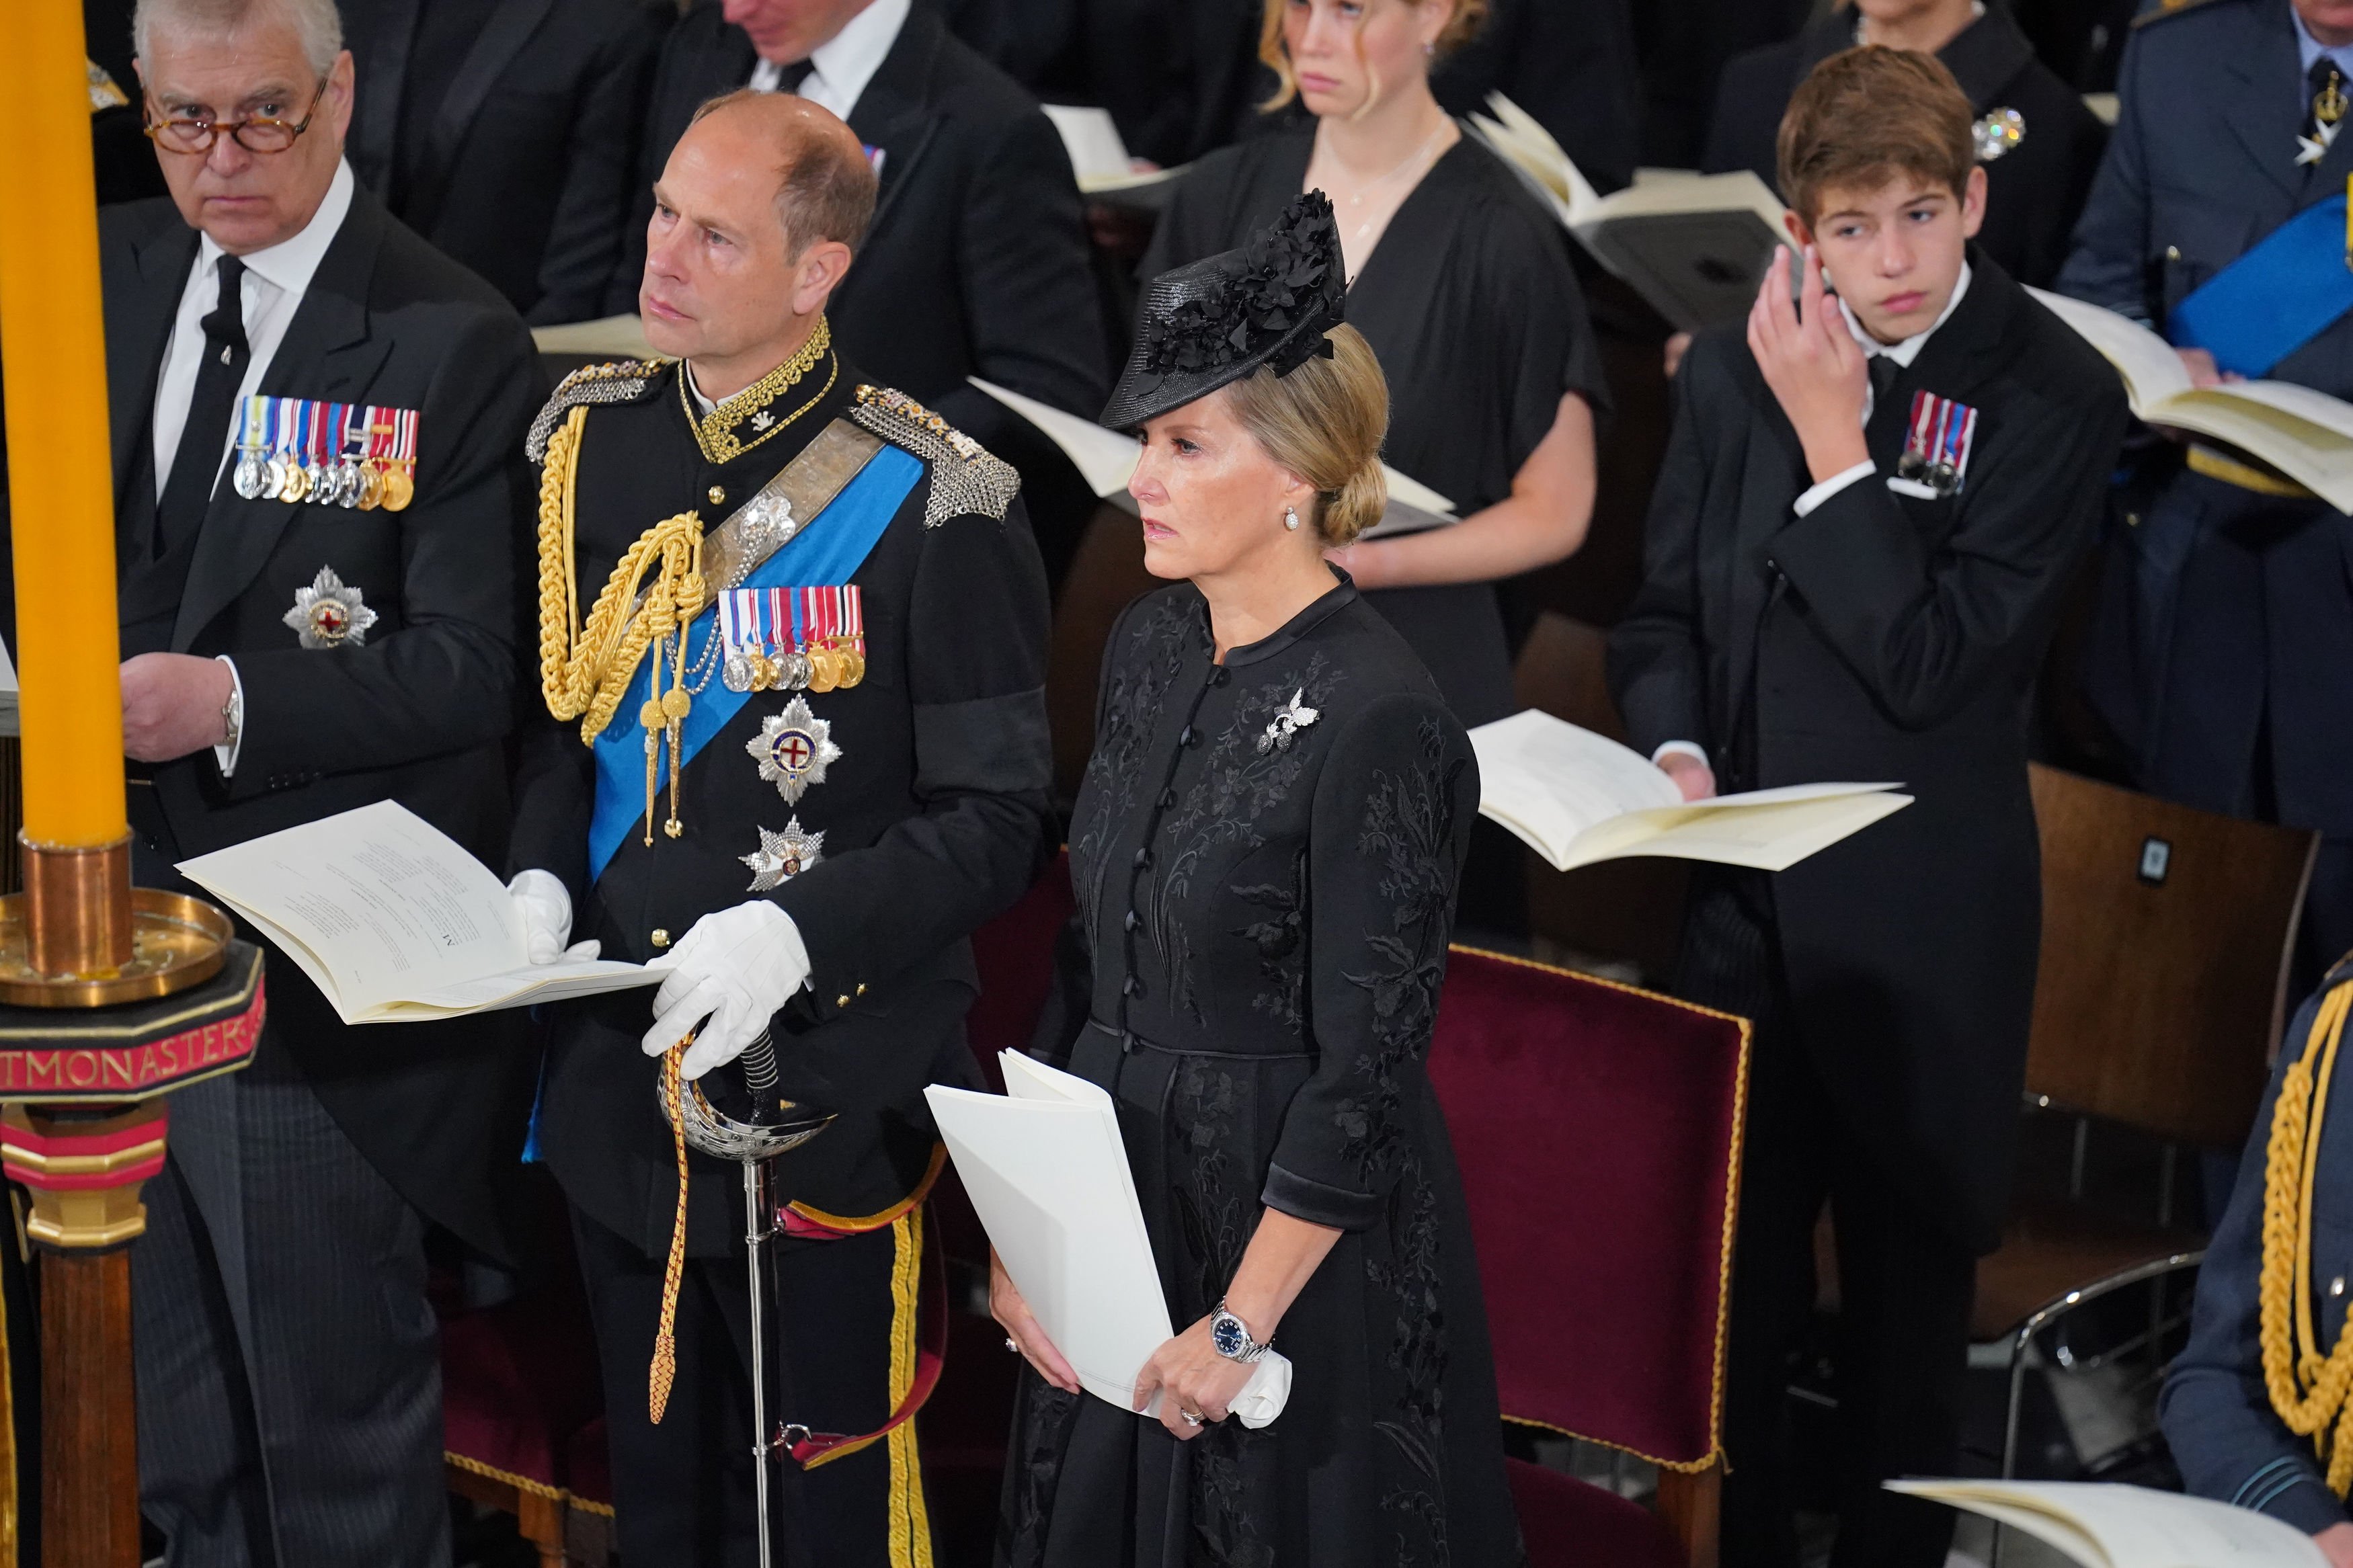 Prince Edward and his wife Sophie Wessex during the Queen funeral ceremony at Westminster Abbey in 2022. | Source: Getty Images 